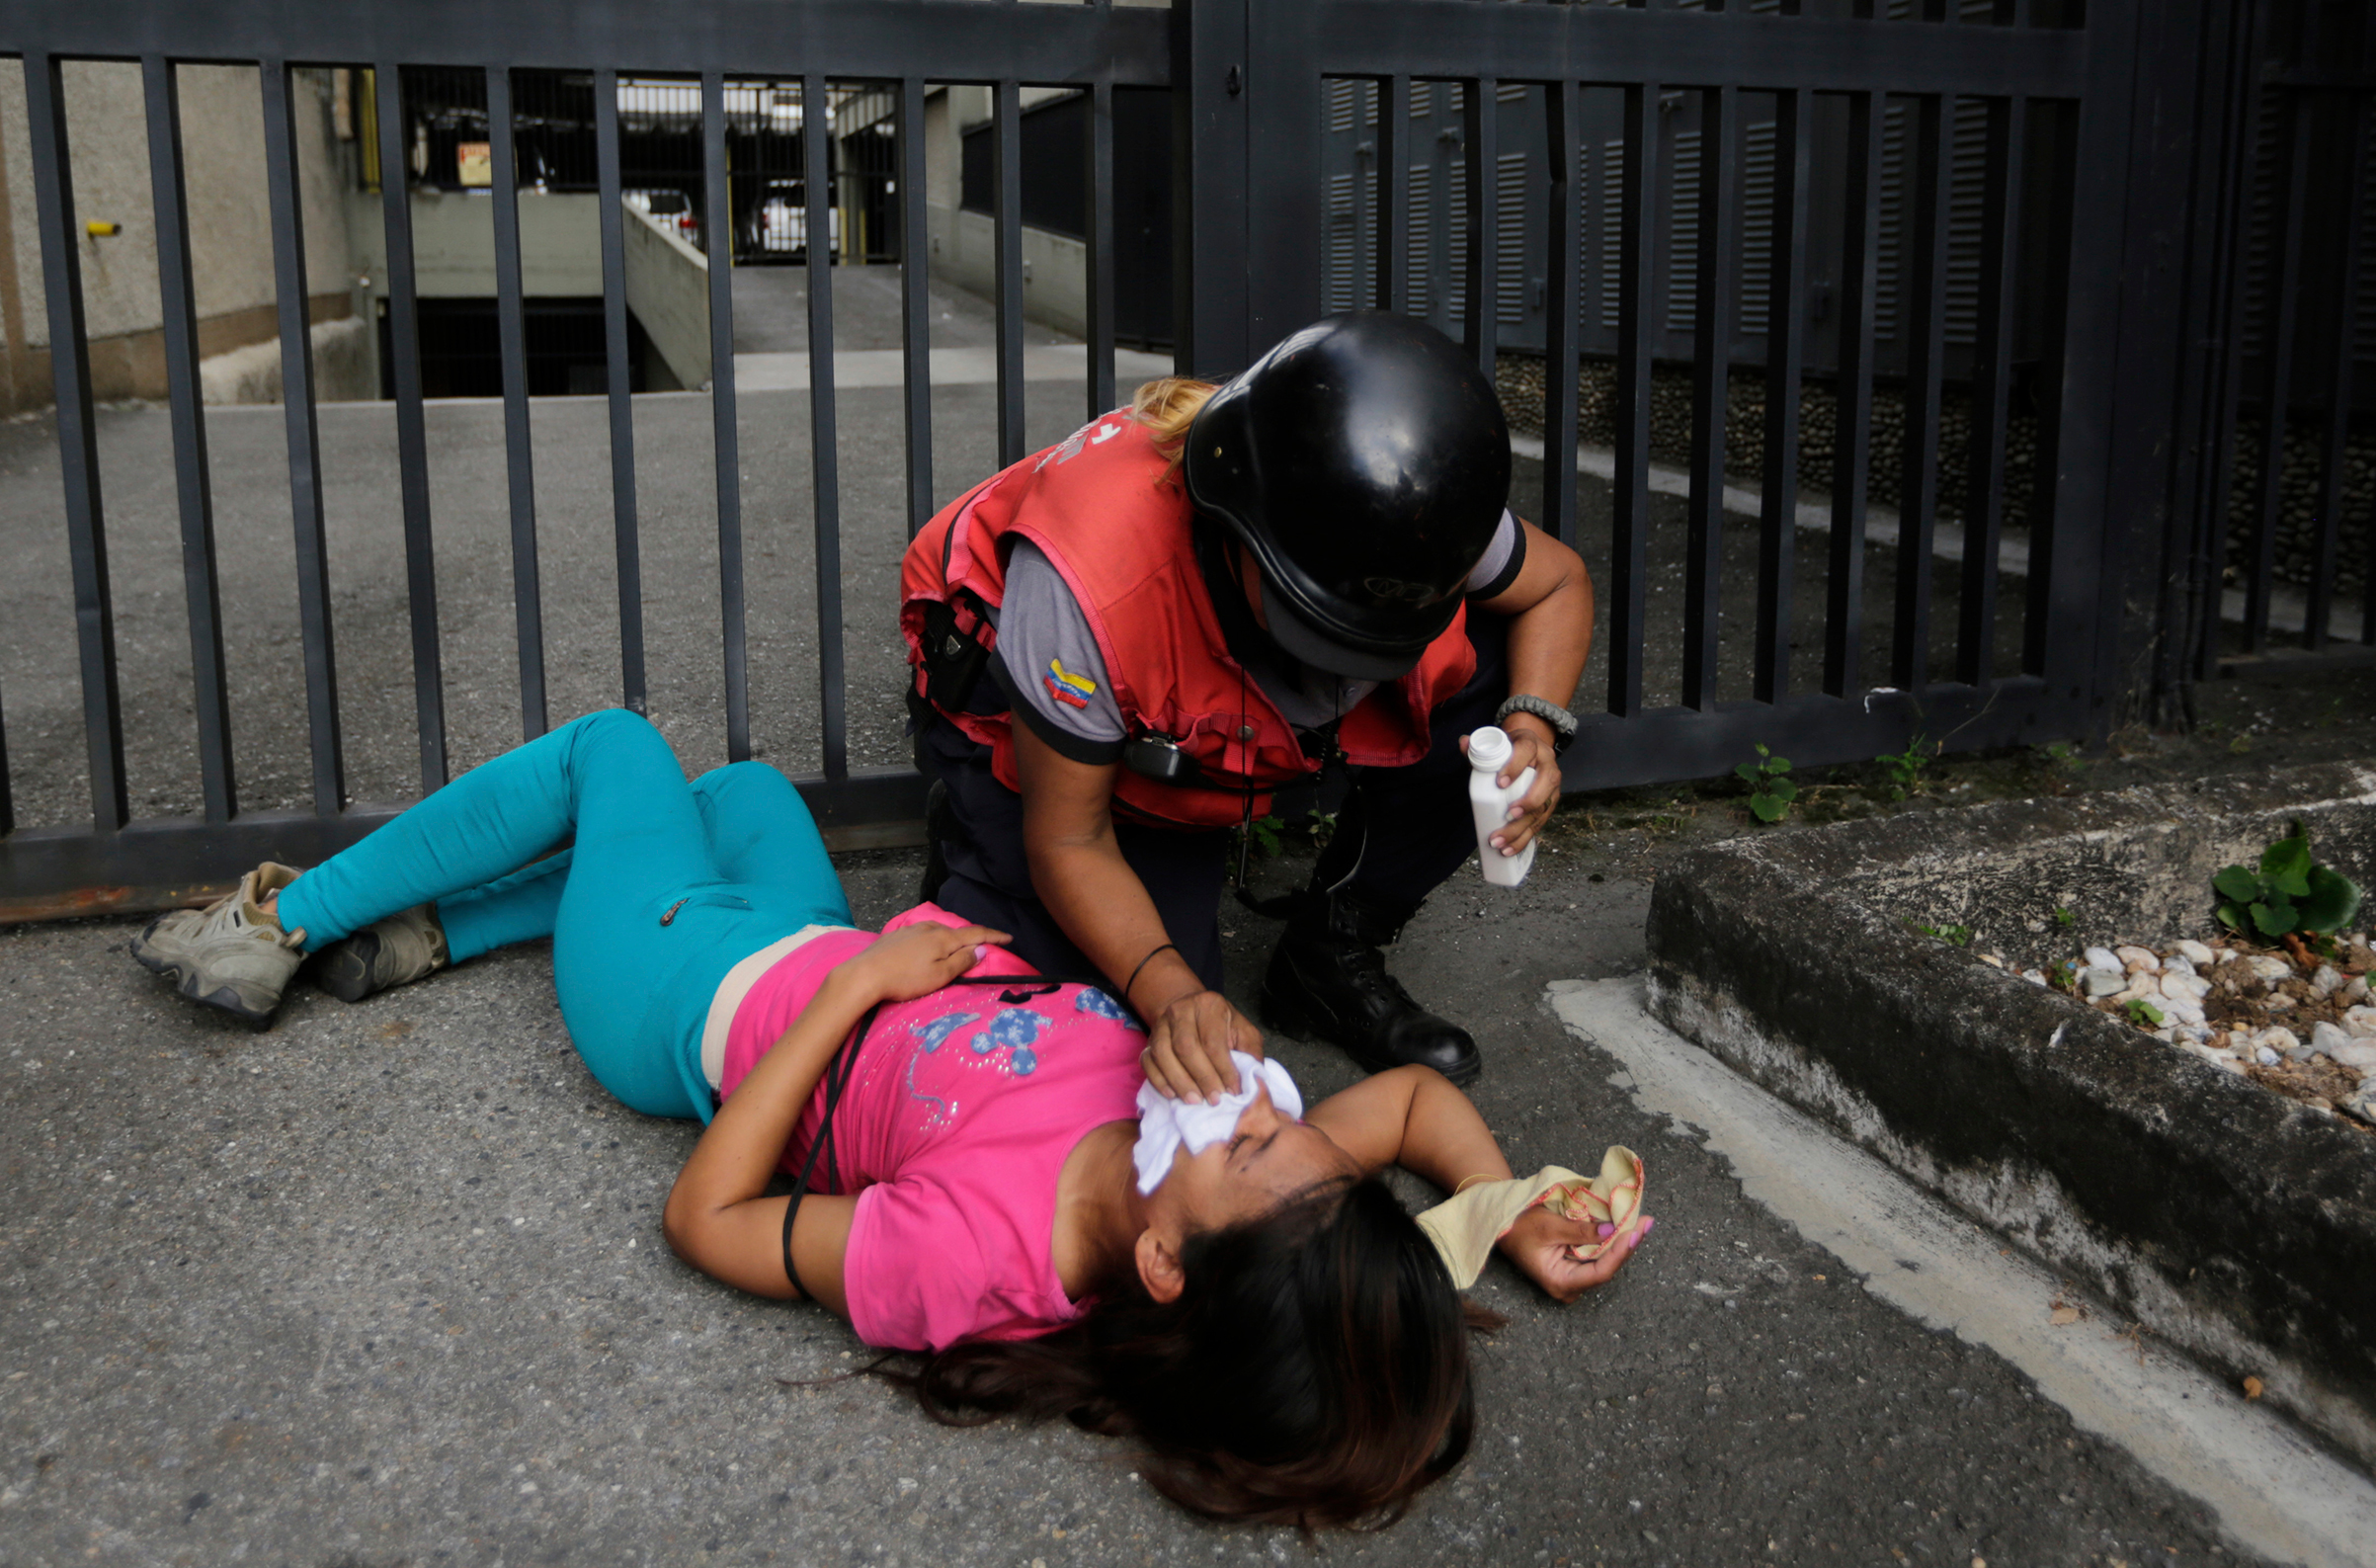 An anti-government protester overcome by tear gas is aided by a paramedic during clashes after a rally demanding the resignation of President Nicolas Maduro in Caracas on Jan. 23, 2019. (Fernando Llano—AP)